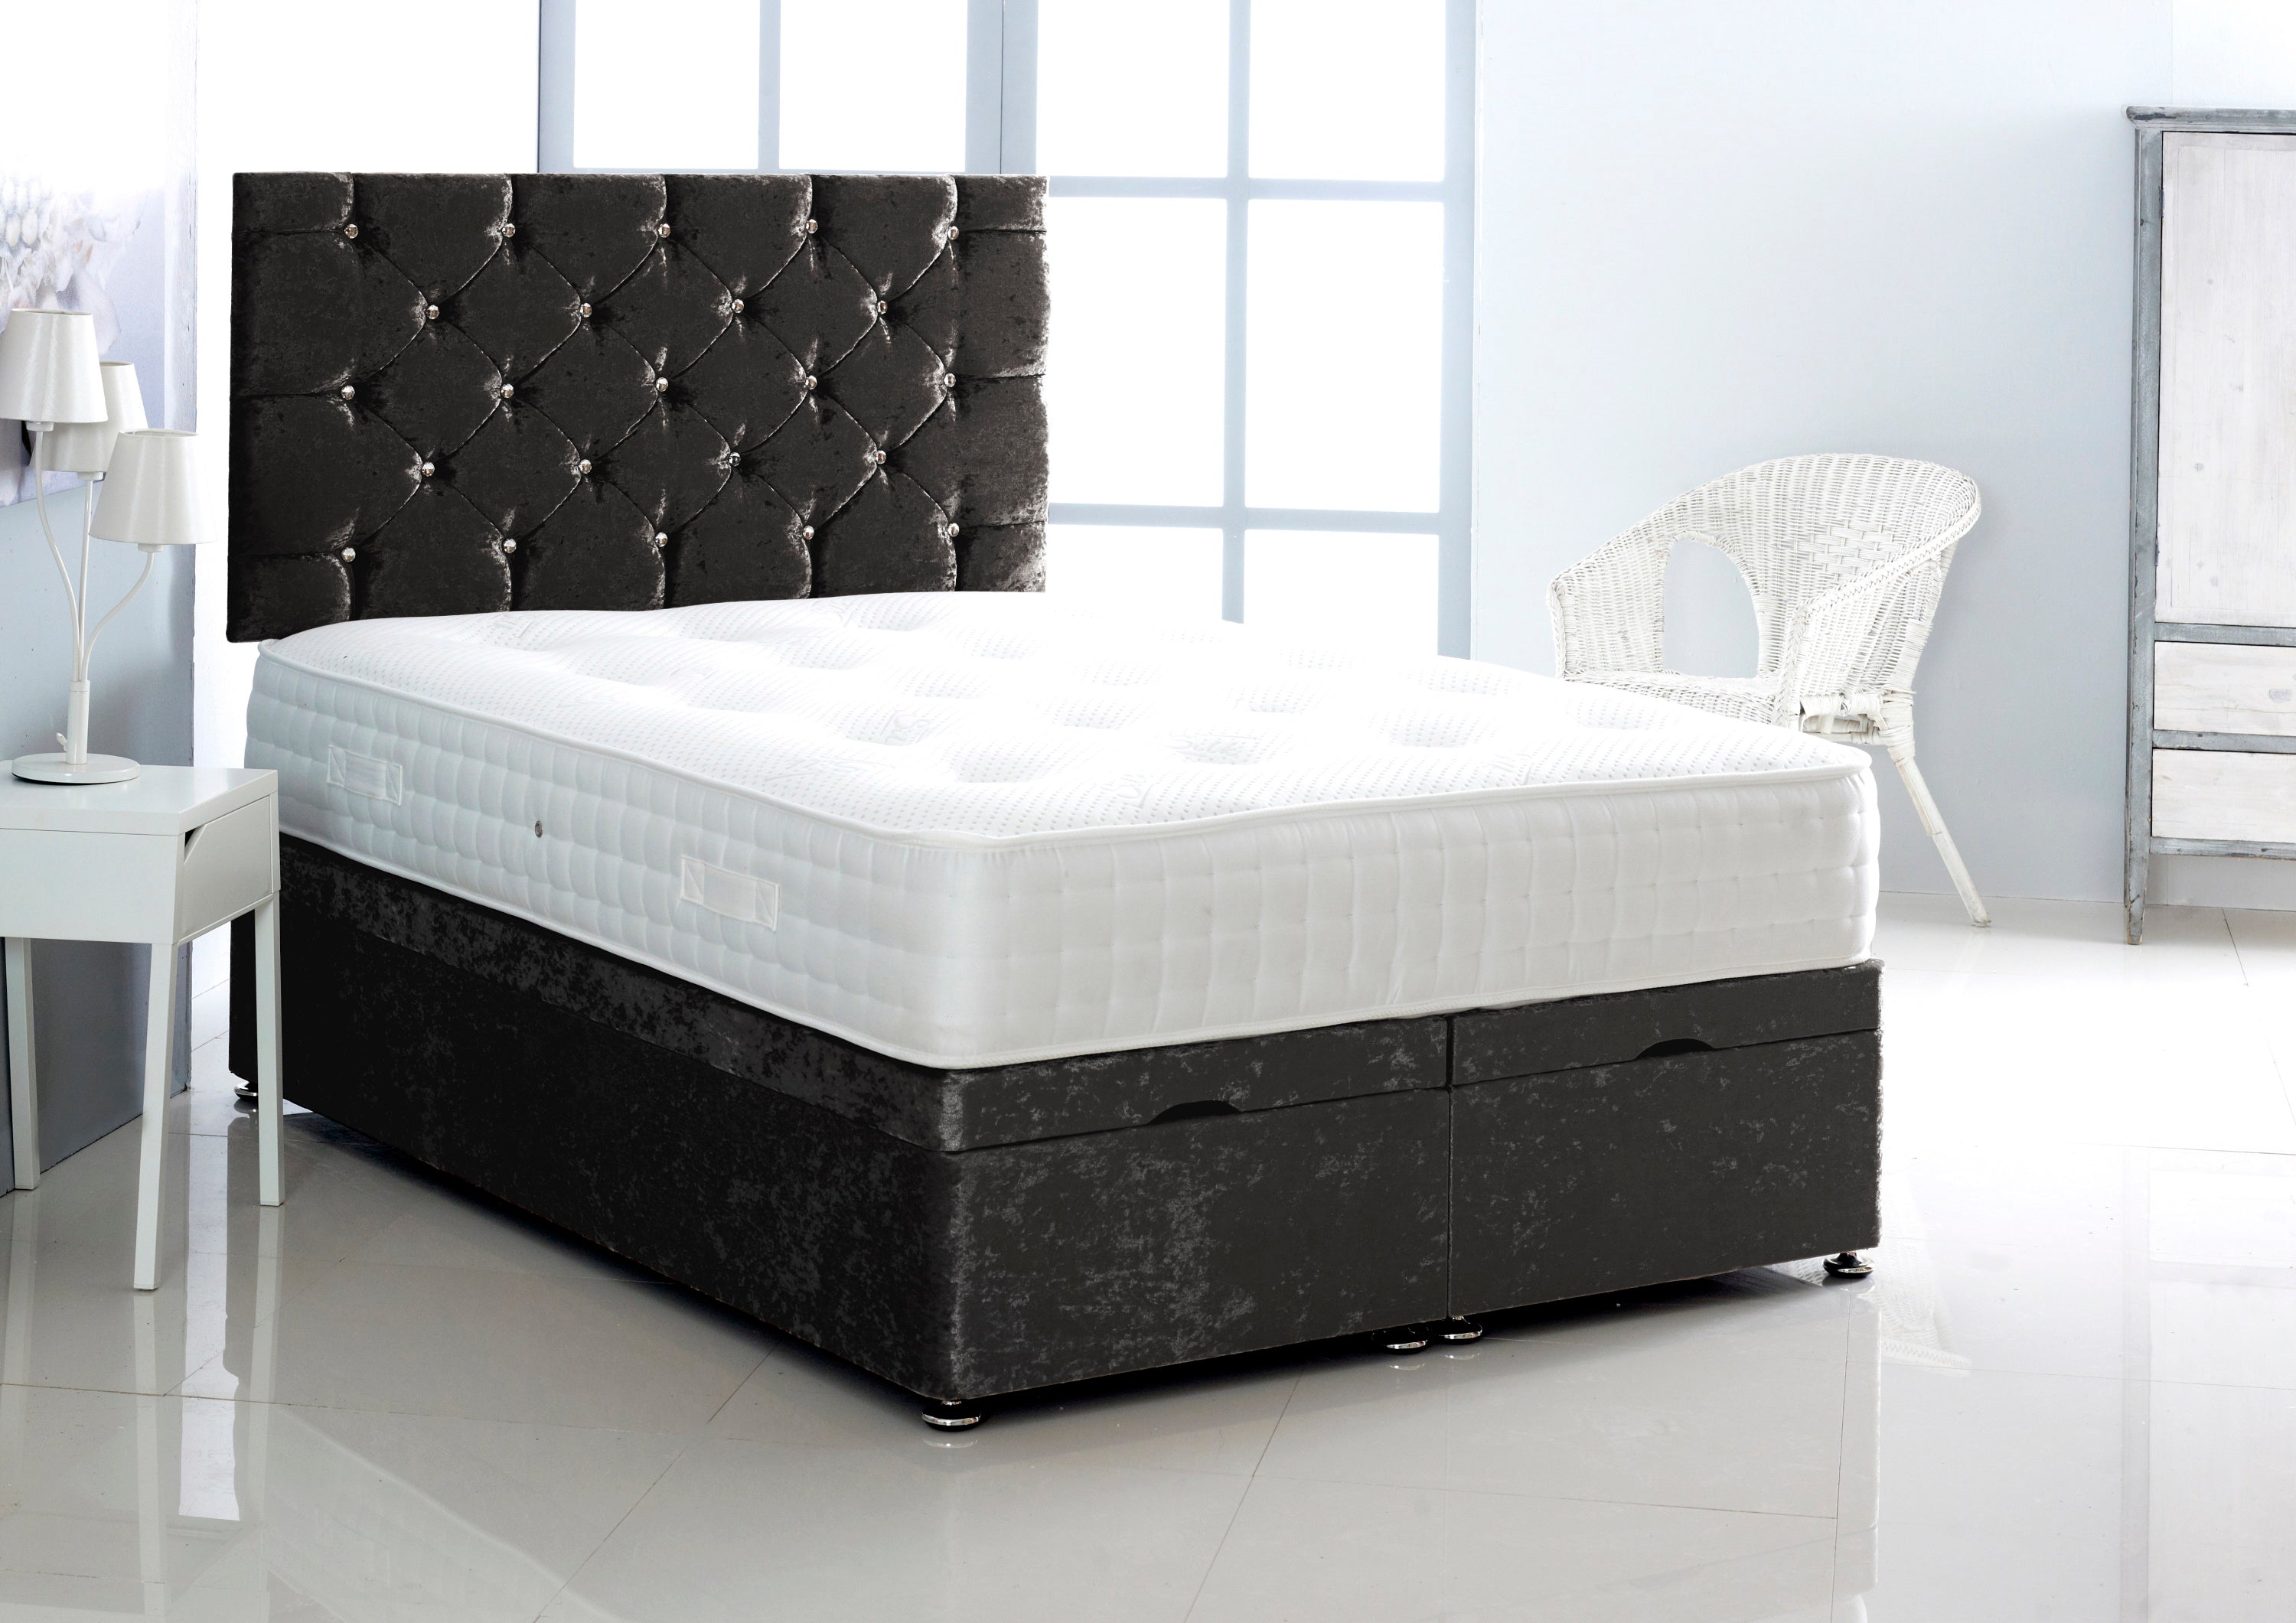 Crushed Velvet Ottoman Storage Divan Bed With Chesterfield Headboard